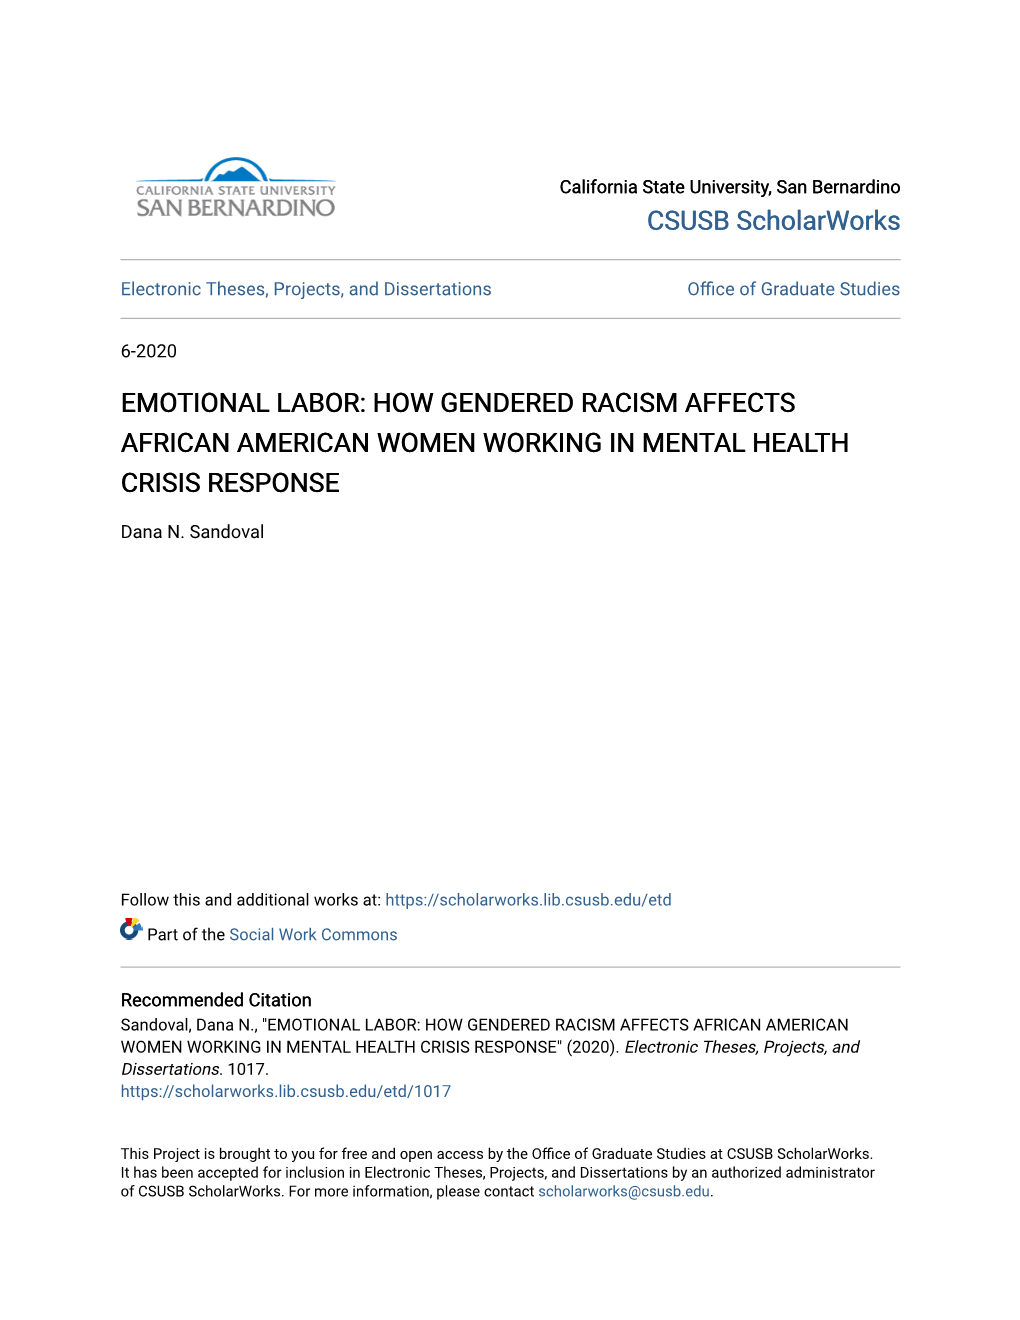 Emotional Labor: How Gendered Racism Affects African American Women Working in Mental Health Crisis Response